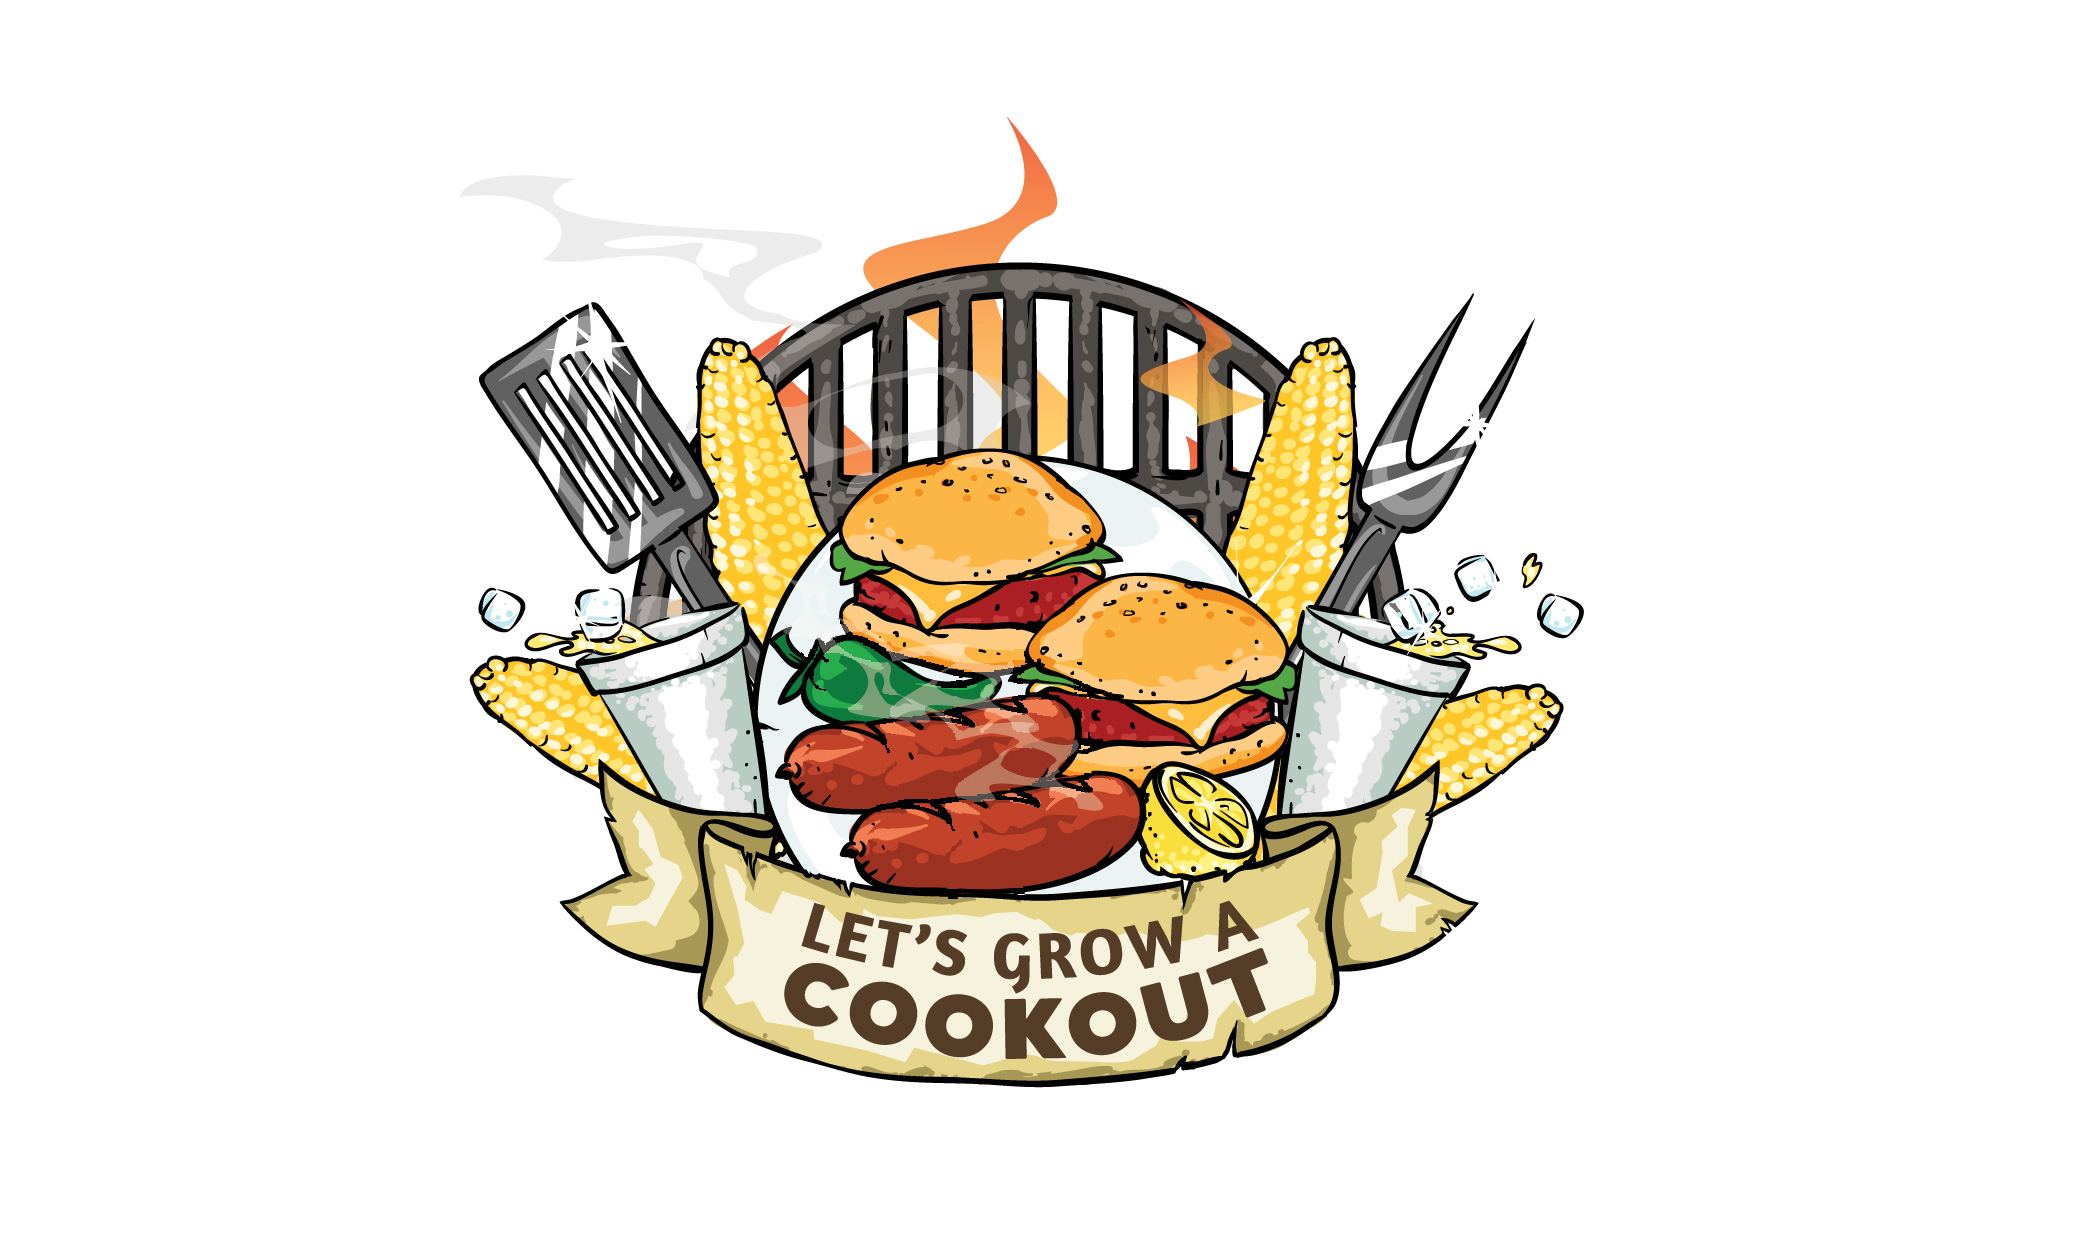 Let's Grow a Cookout Group Tour in kentucky